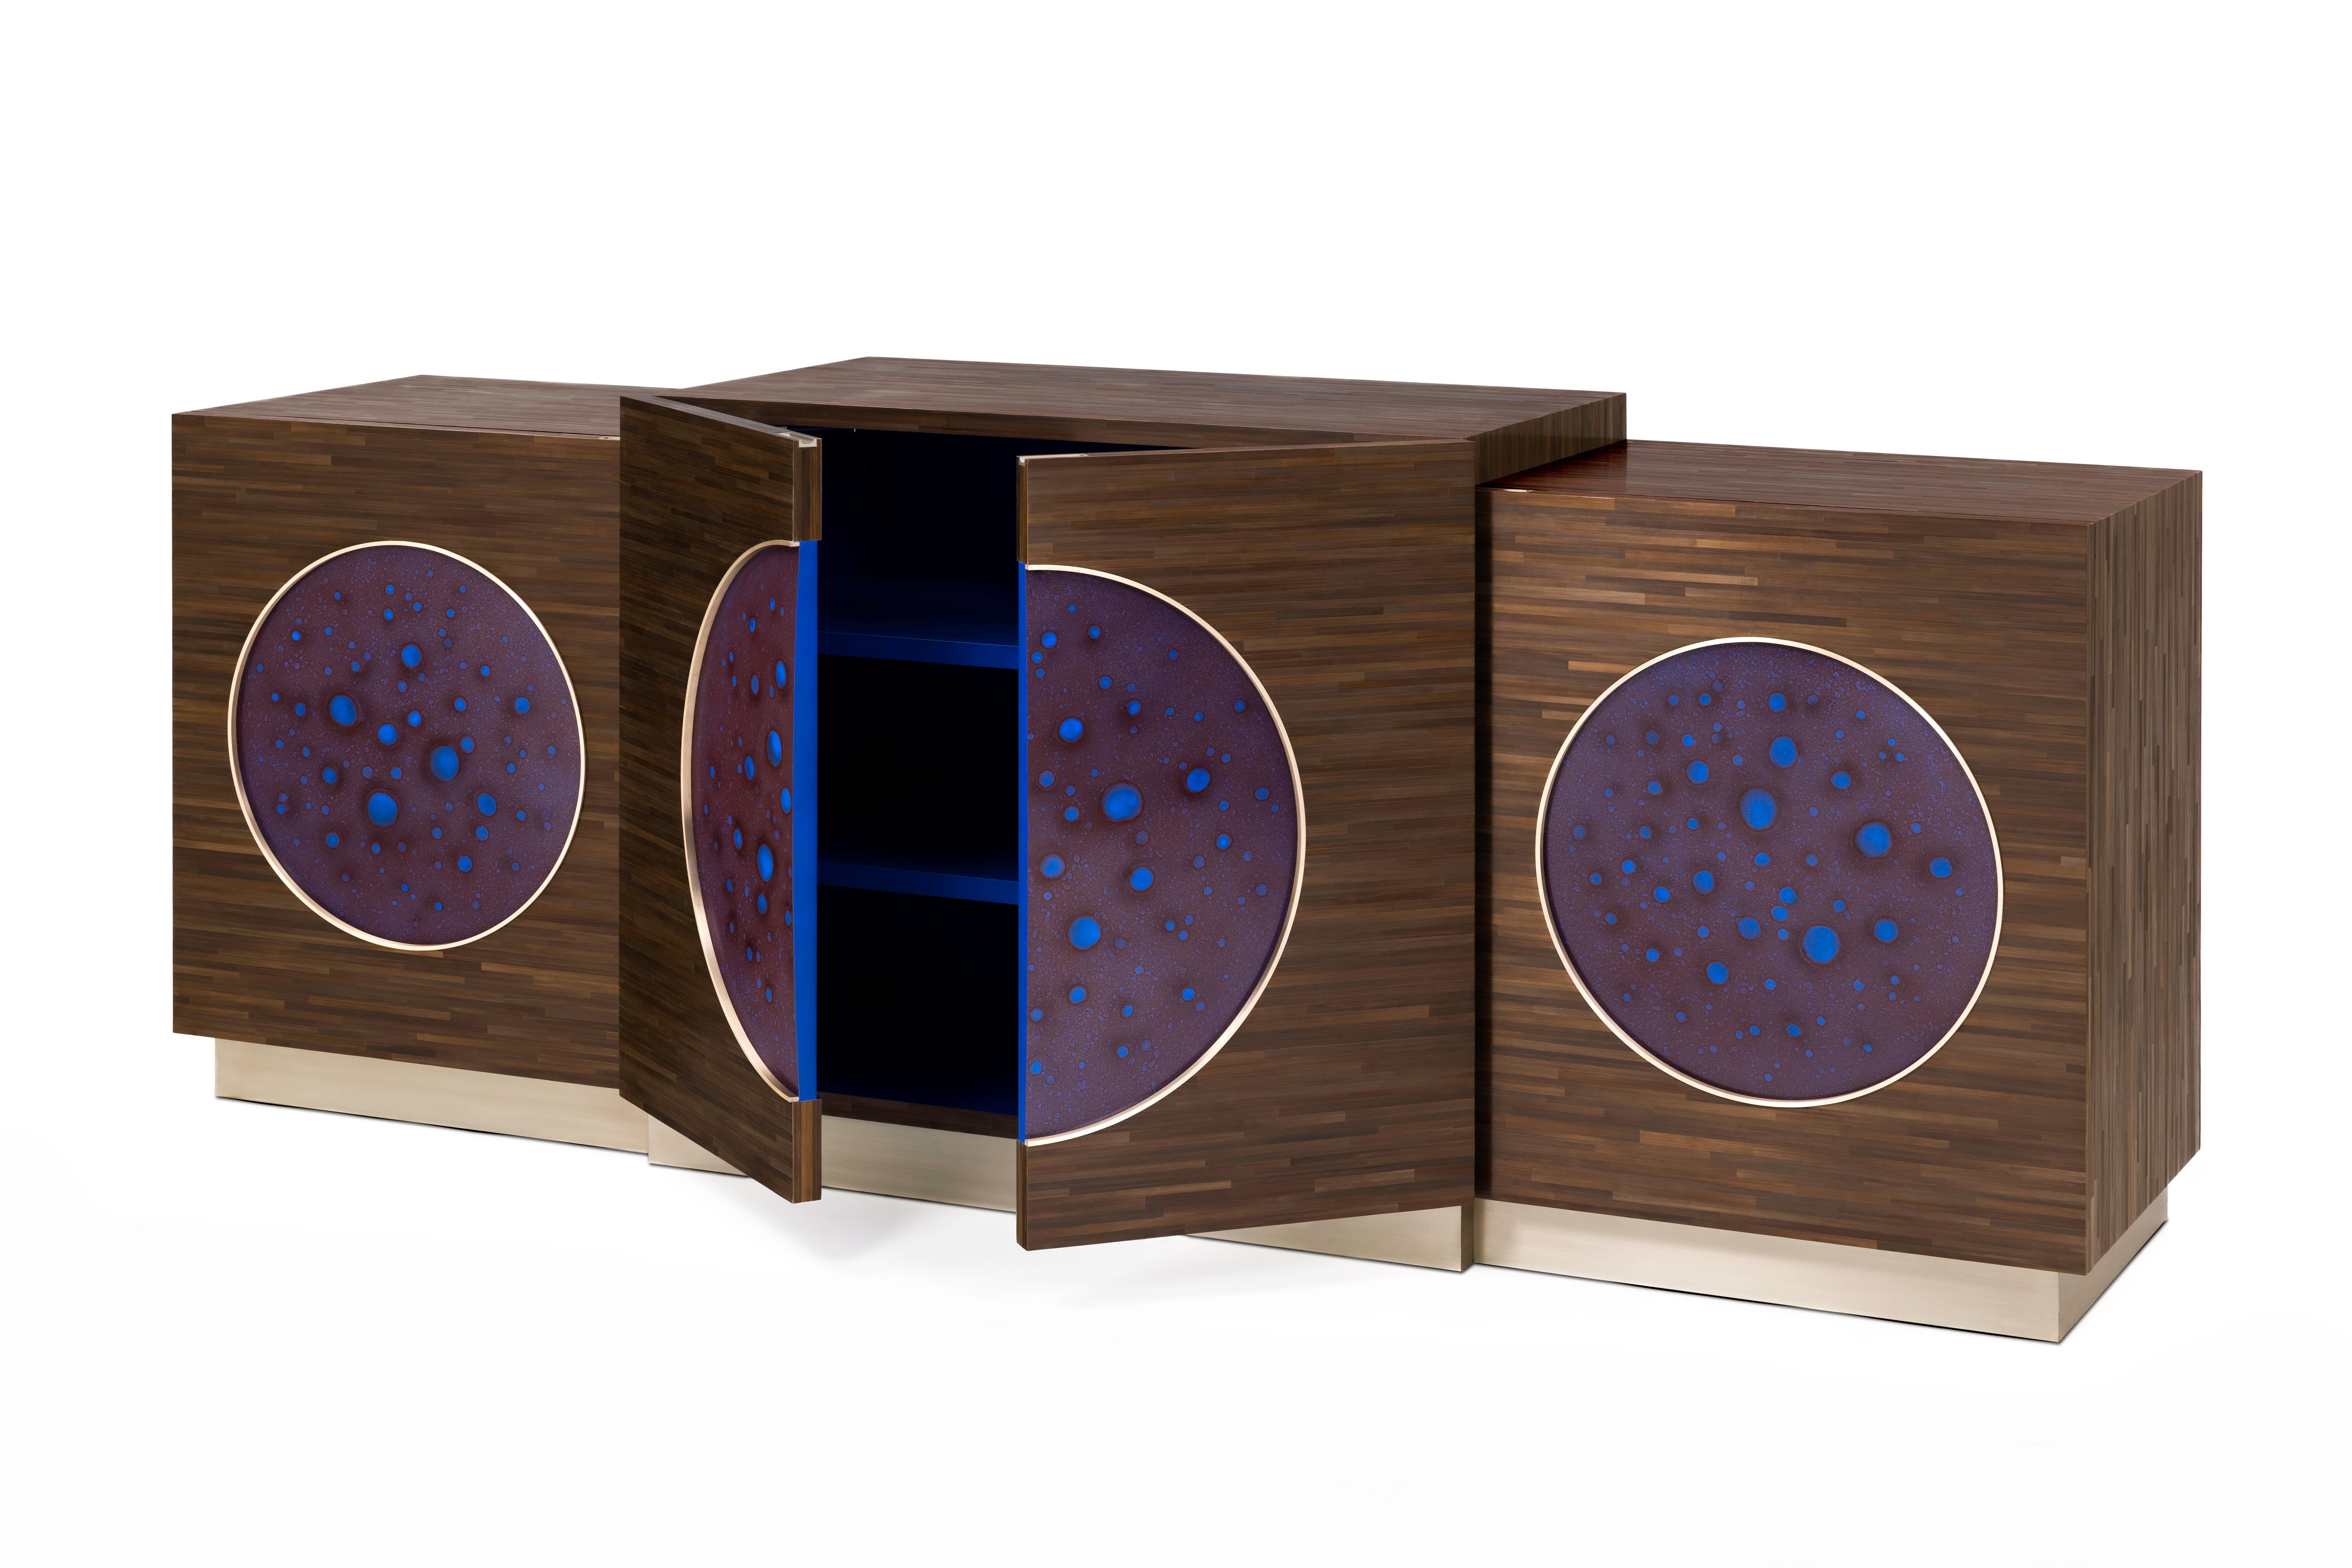 Designed by Jean-Paul Viollet.
Straw marquetry by Sandrine Viollet.